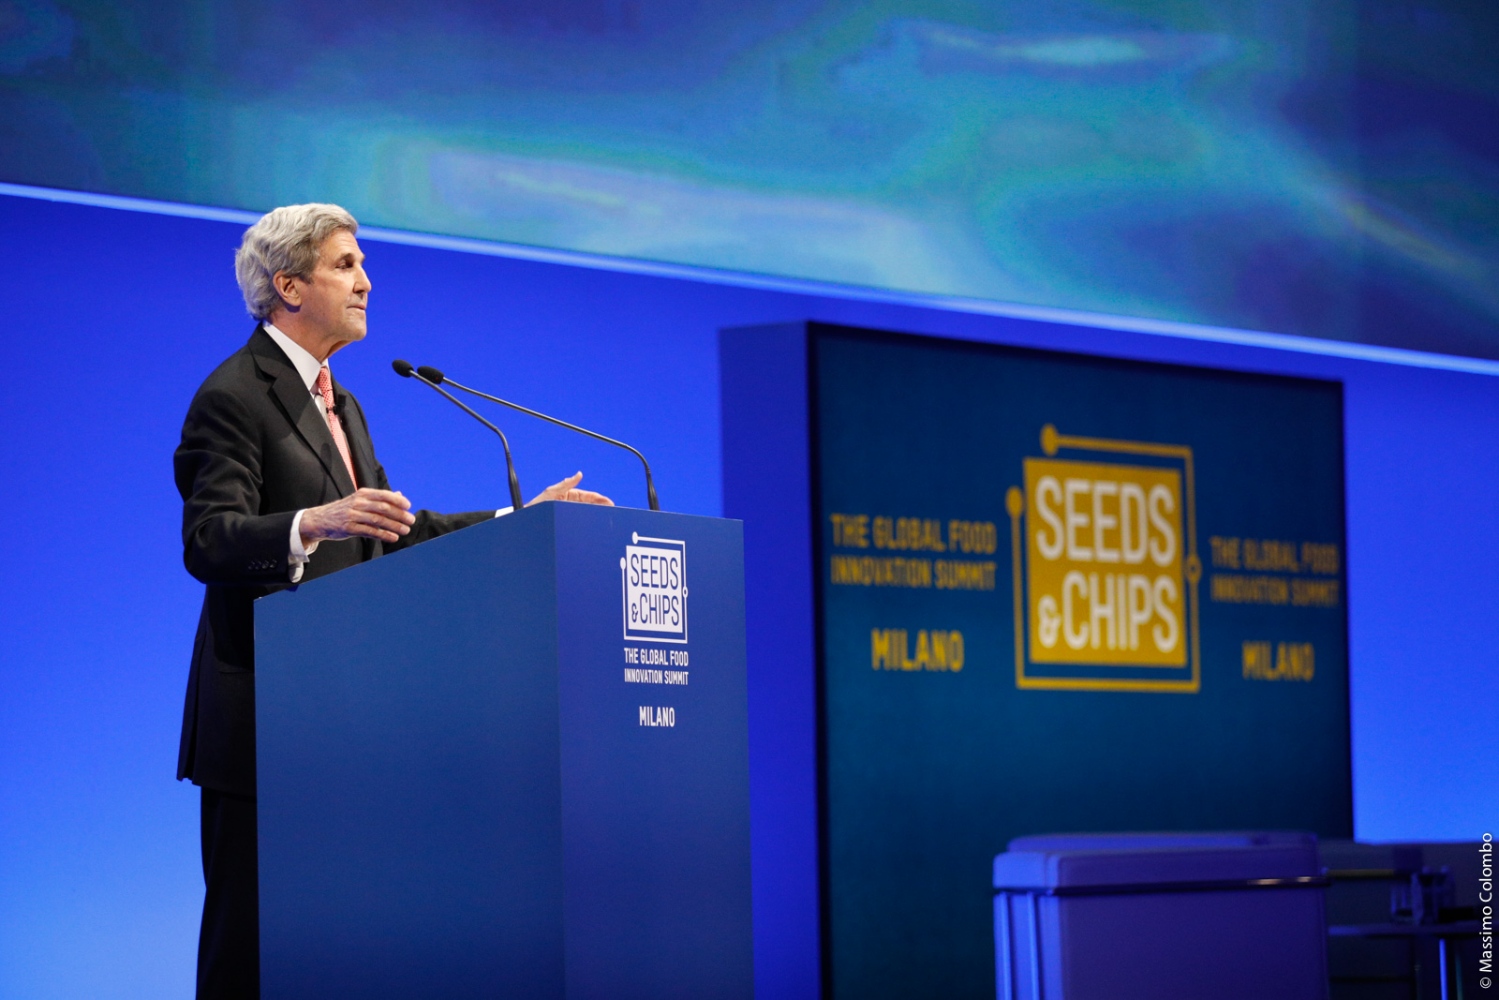 My pics on LifeGate network. May 8th, Milan, Italy. SeedsandChips, the leading food innovation summit for the world. Remarks by John F. Kerry - 68th U.S. Secretary of State